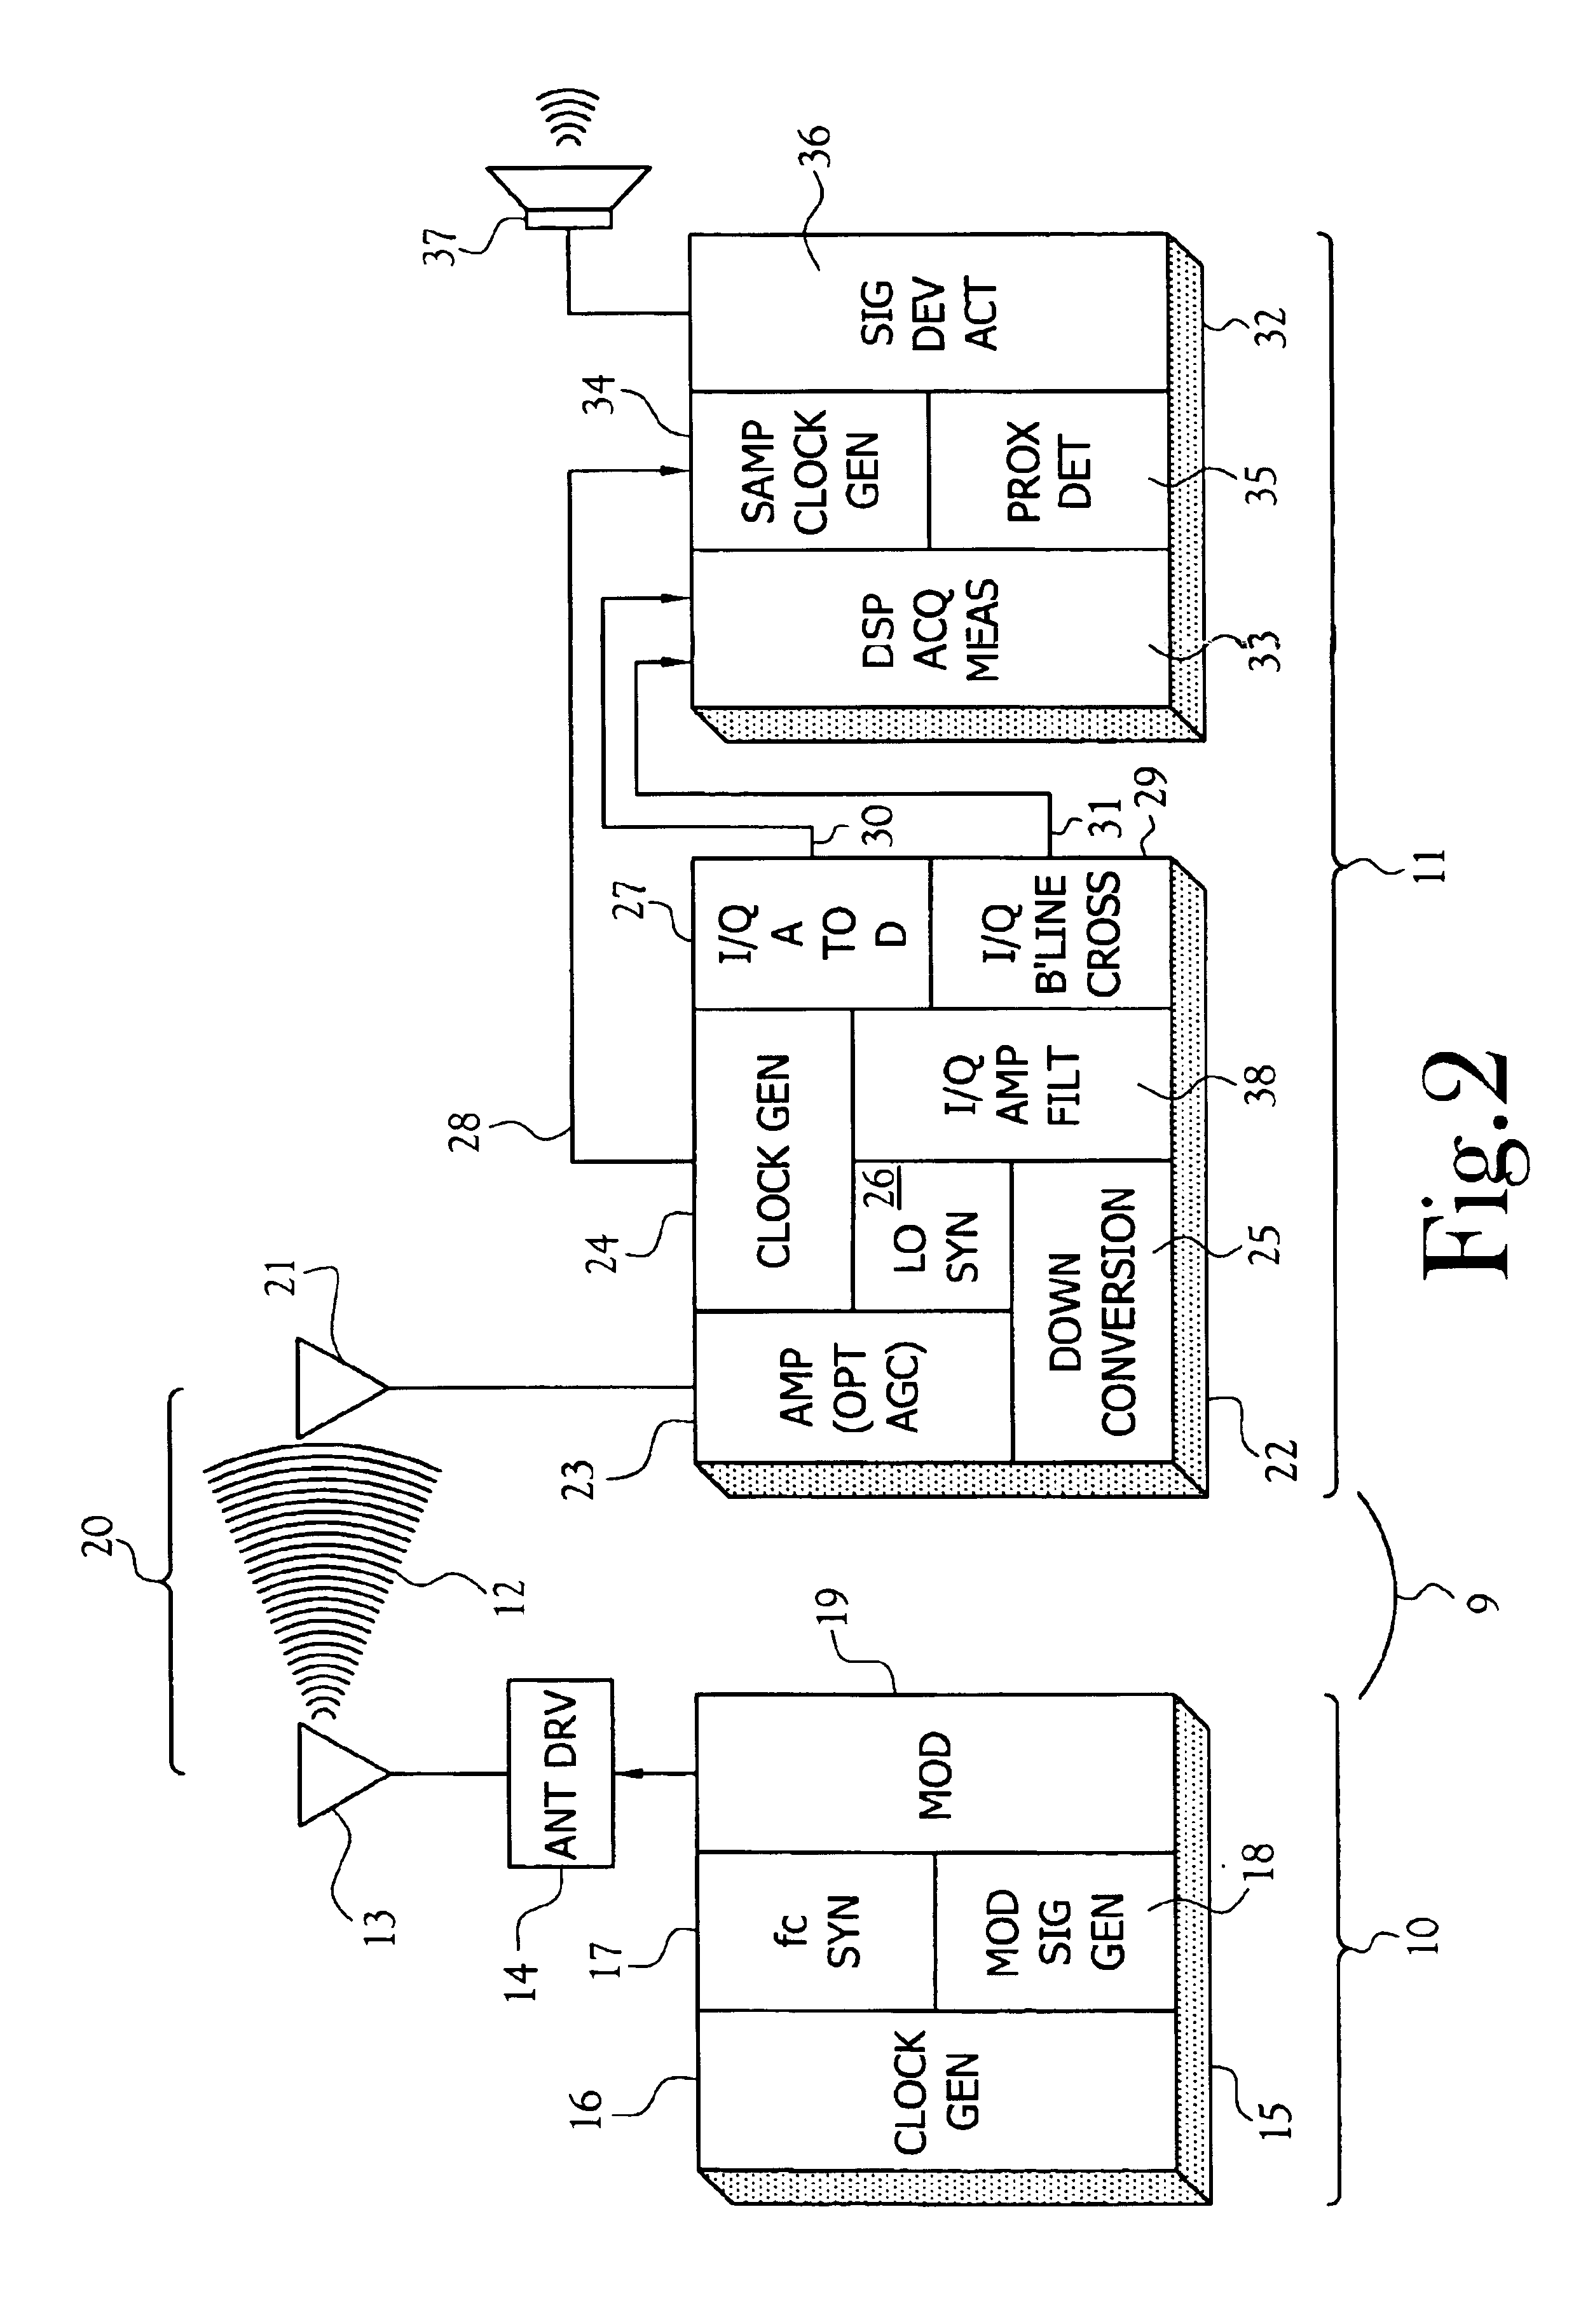 Wireless boundary proximity determining and animal containment system and method